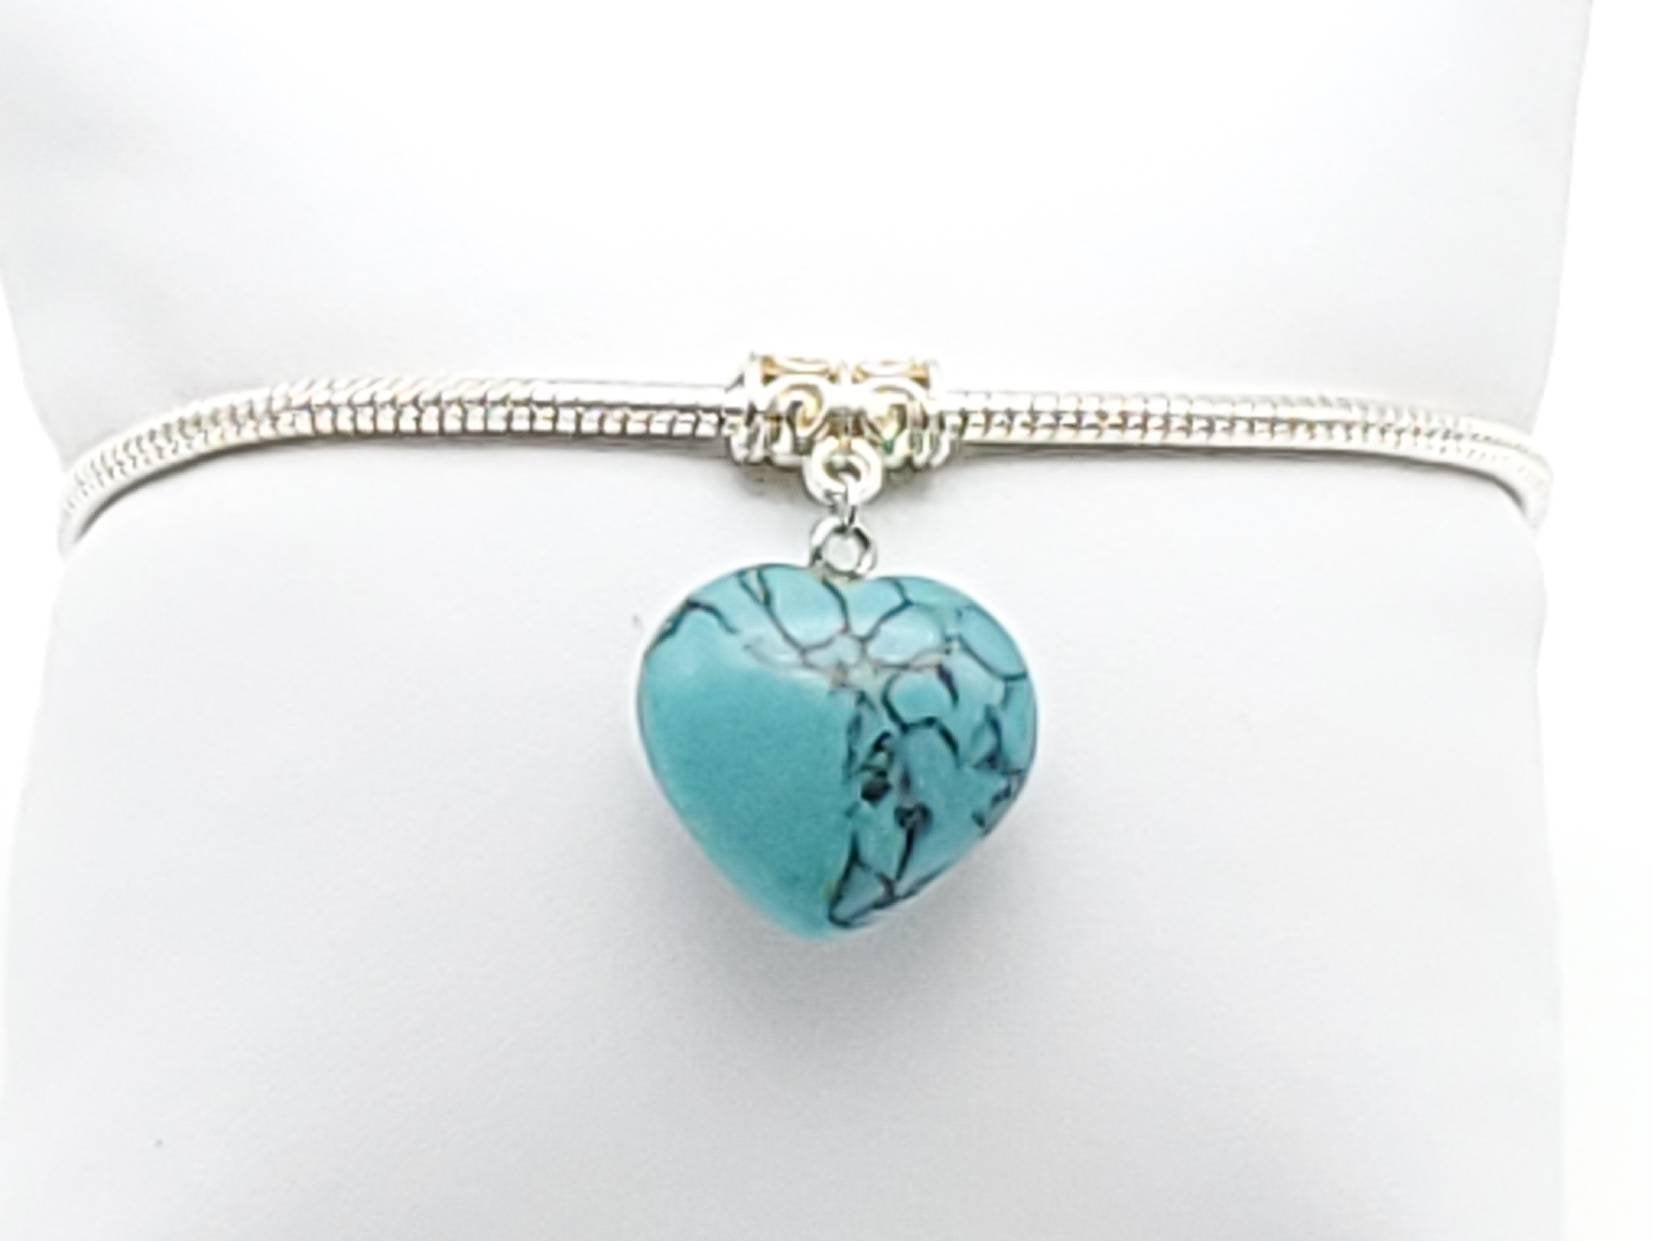 Charm Bracelet with Turquoise Stone Heart - The Caffeinated Raven